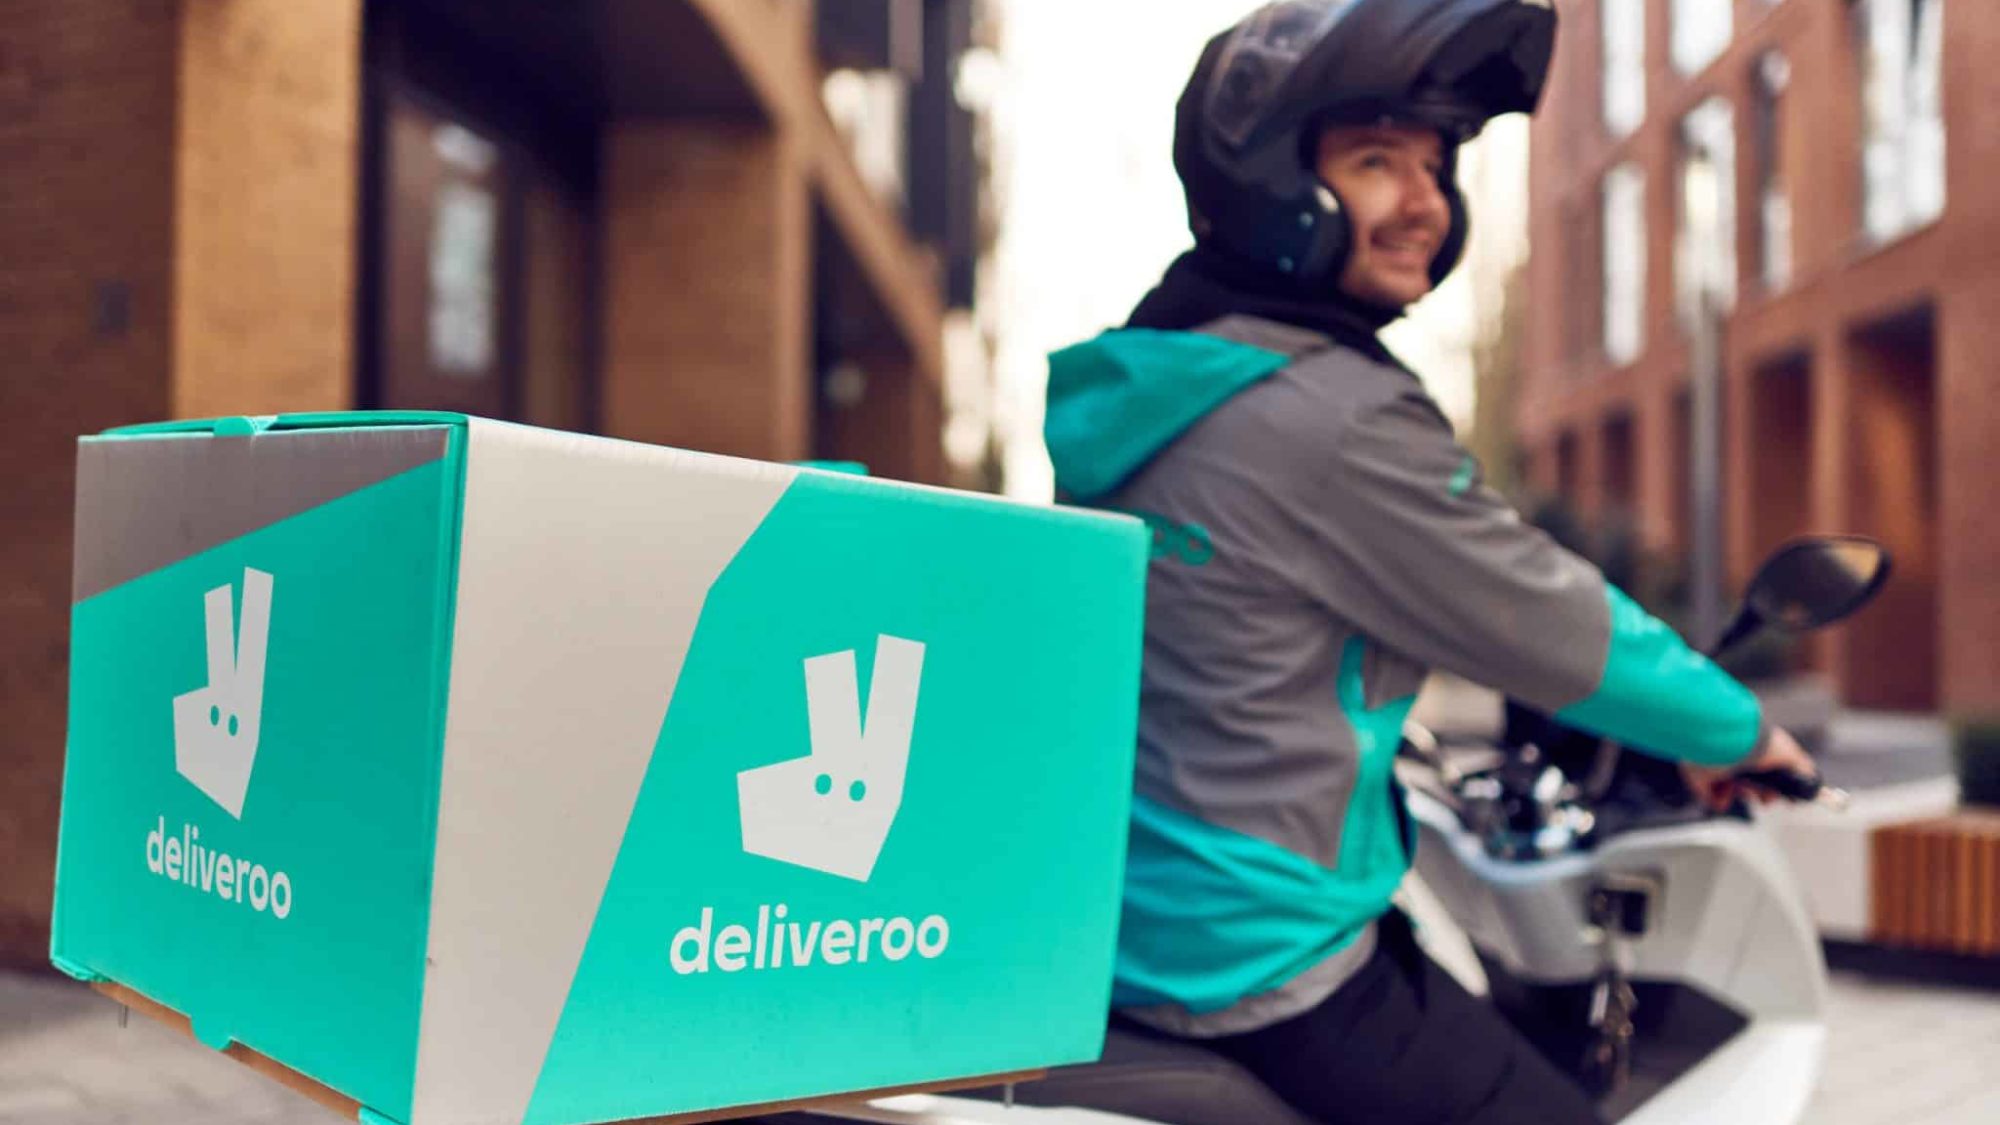 Deliveroo launches new advertising platform